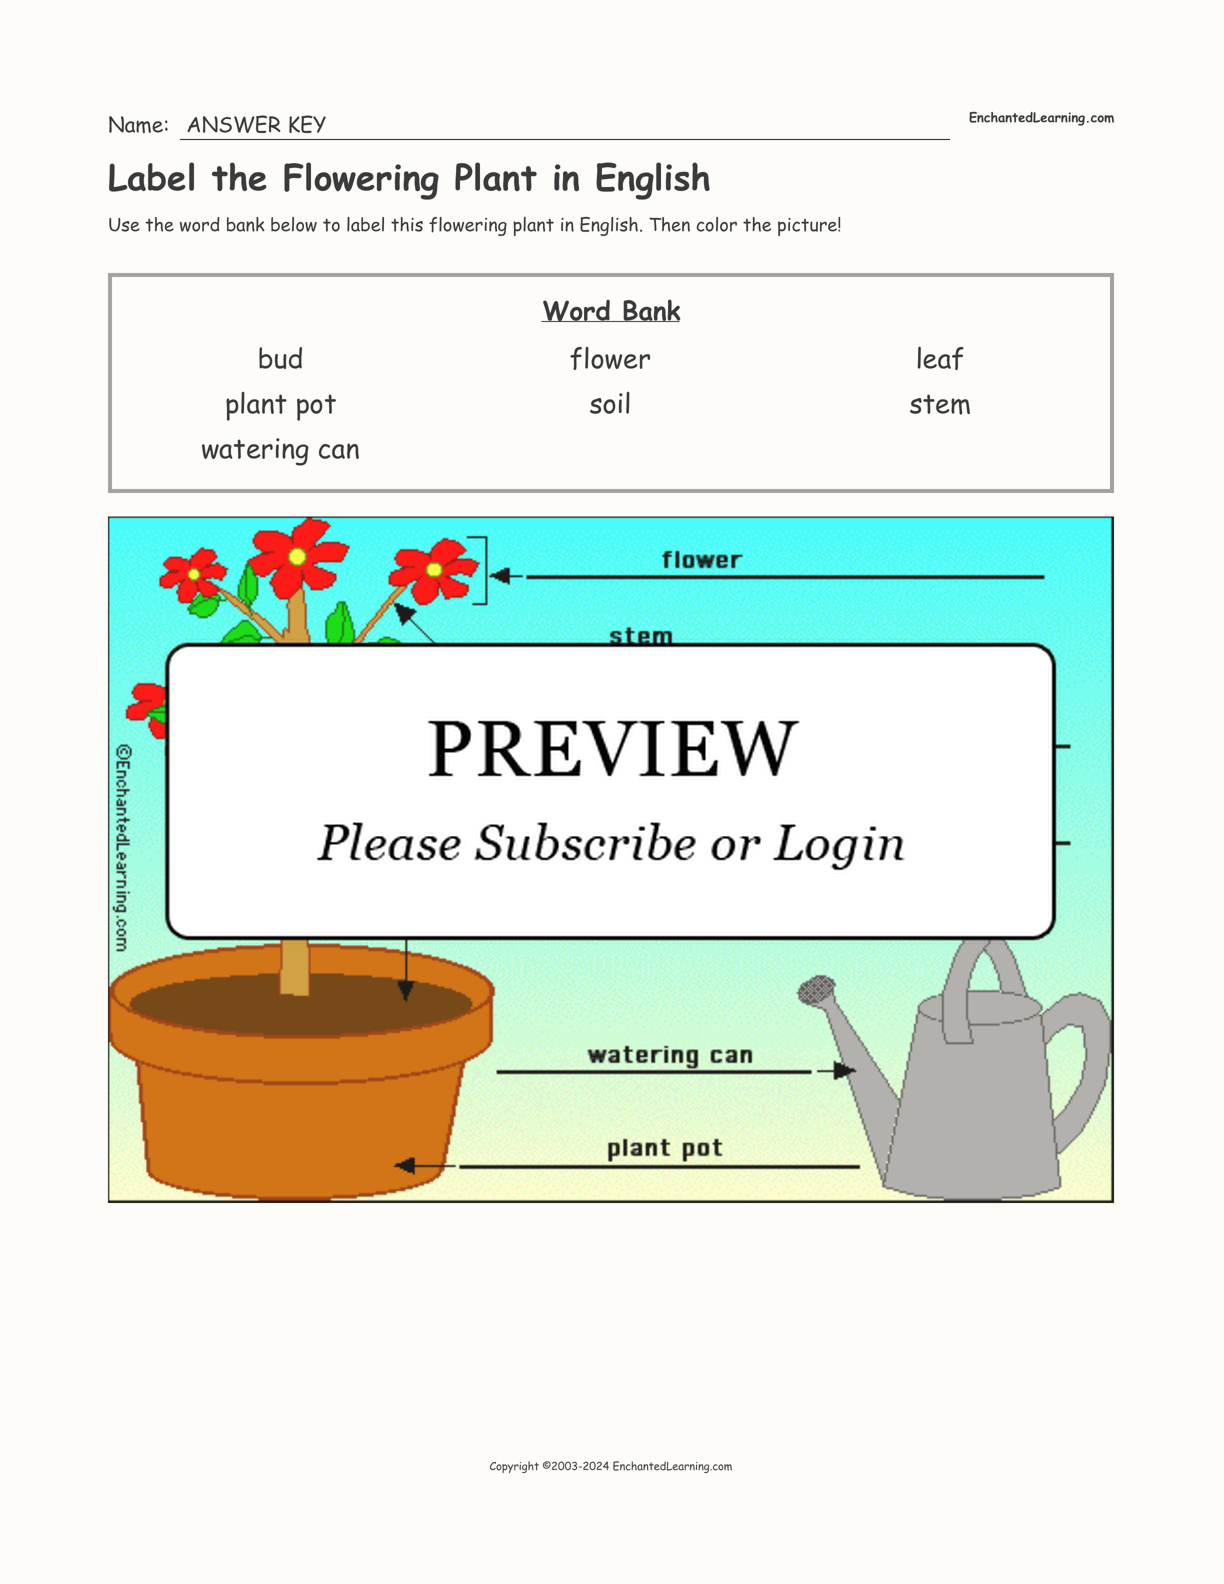 Label the Flowering Plant in English interactive worksheet page 2